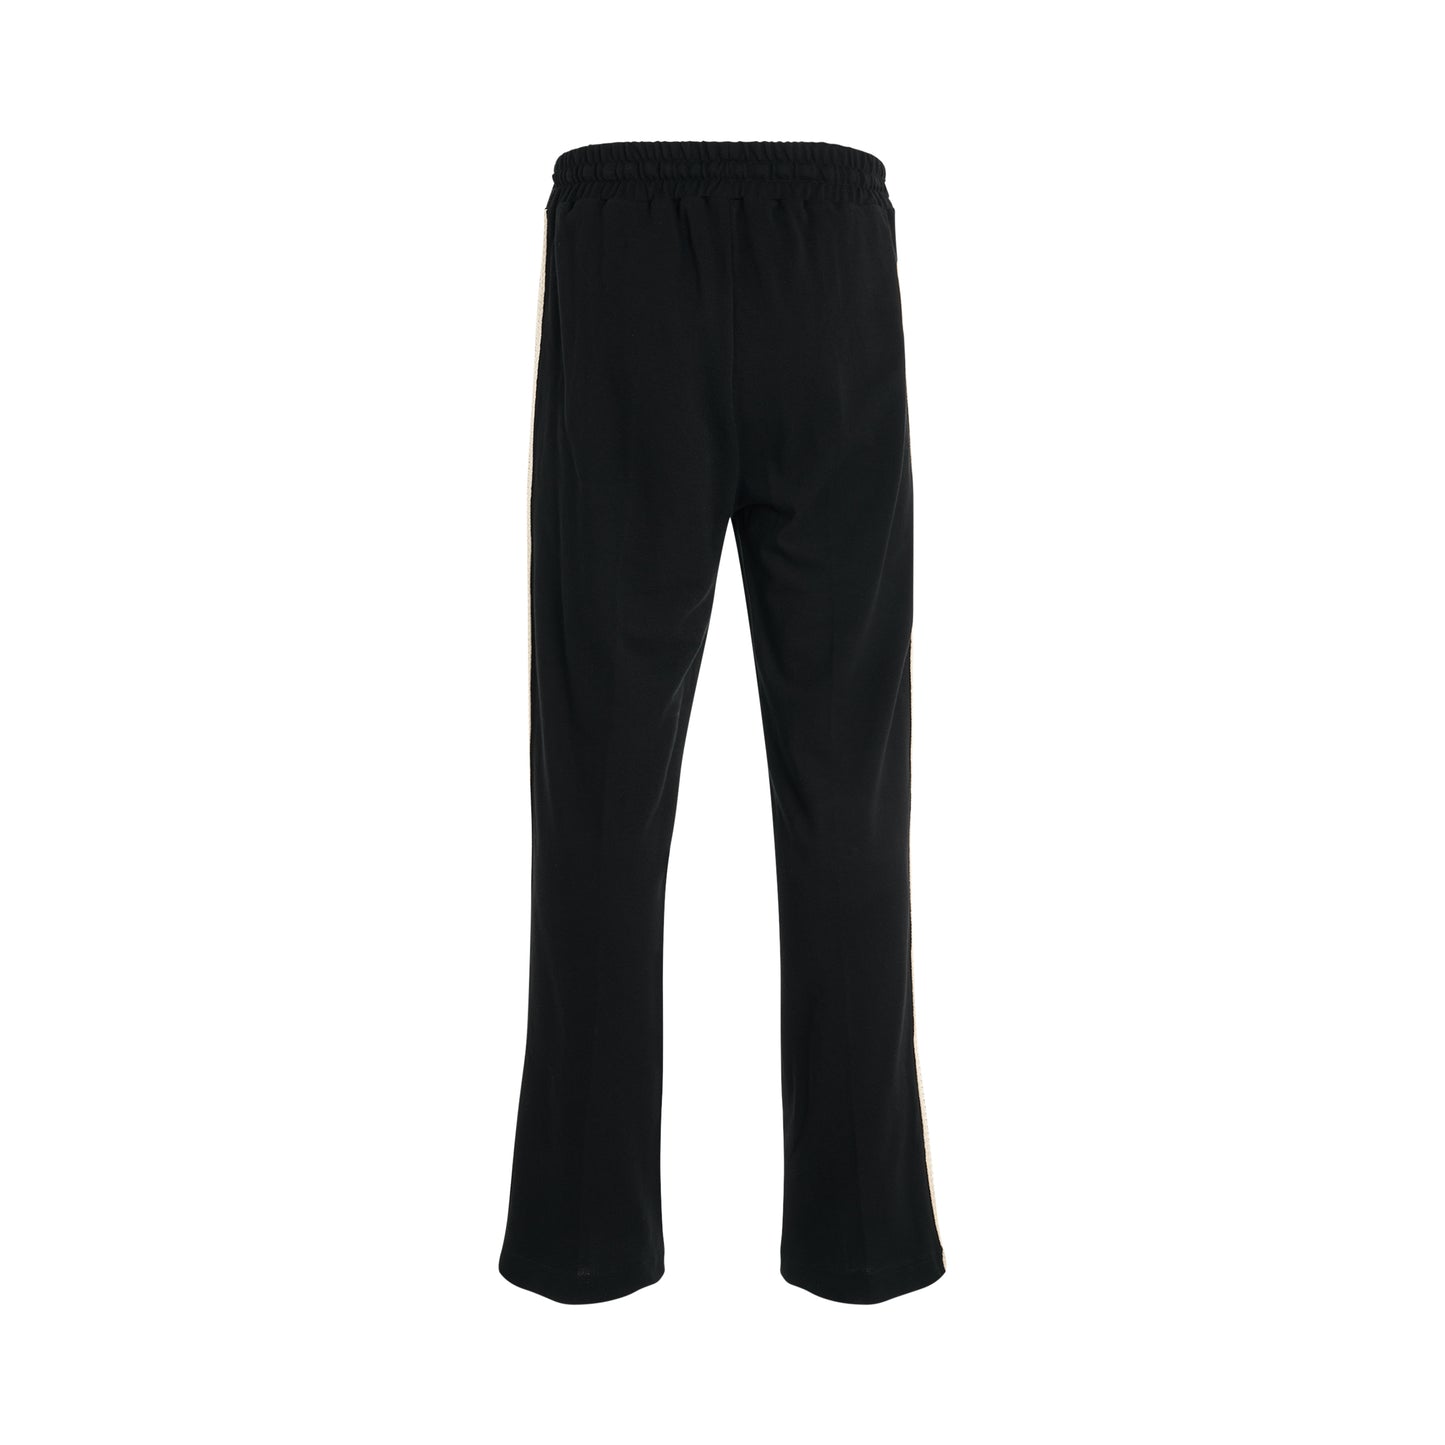 PA Monogram Piquet Trackpants in Black/Off White